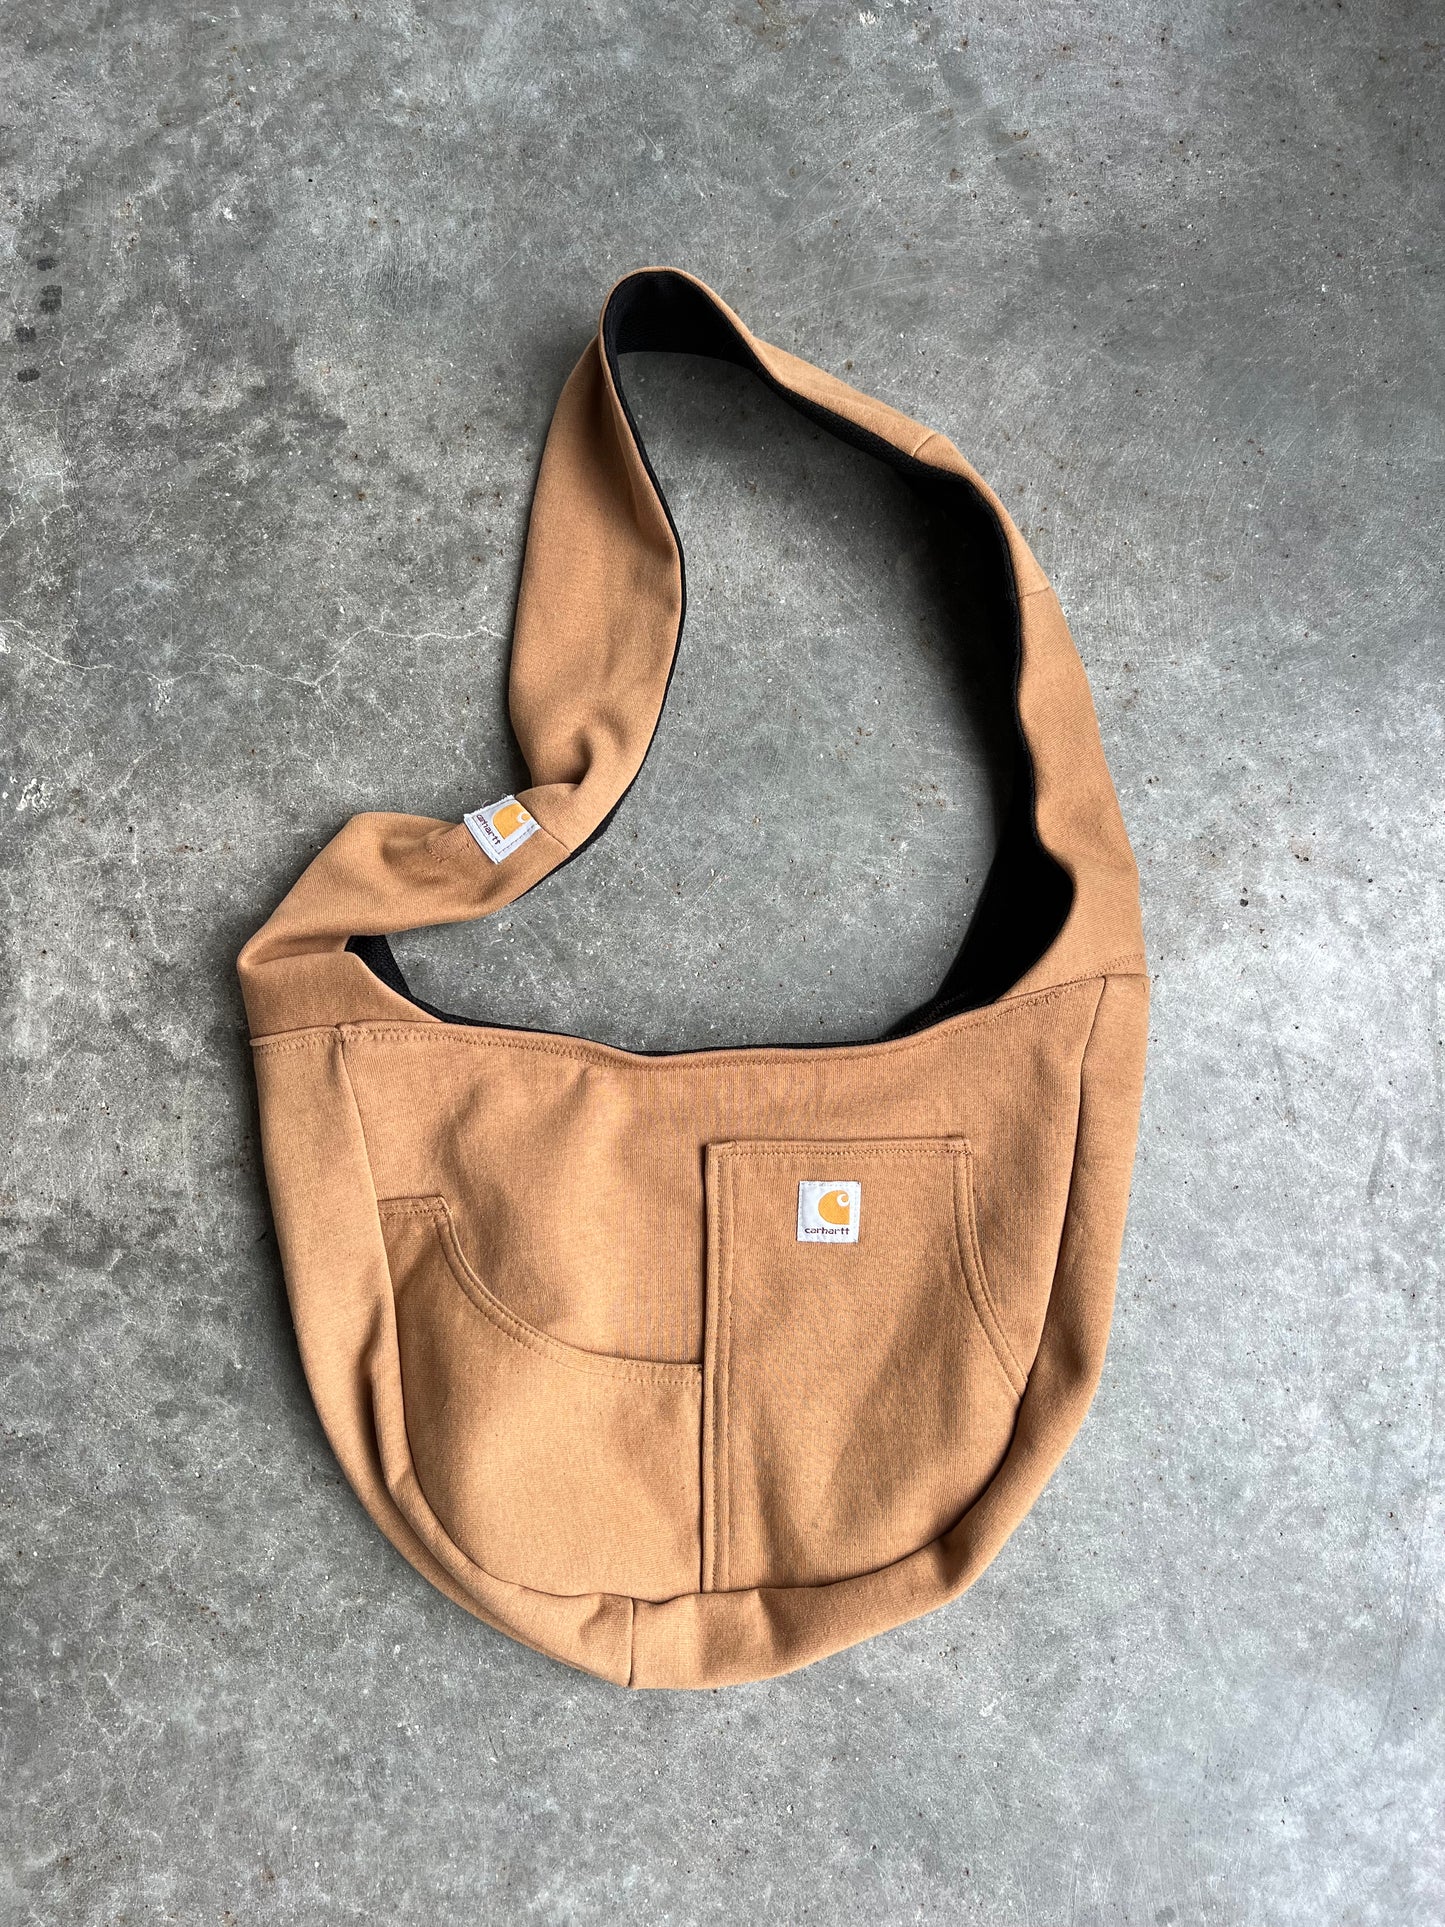 Reworked Carhartt Tote - OS – AGED IVY